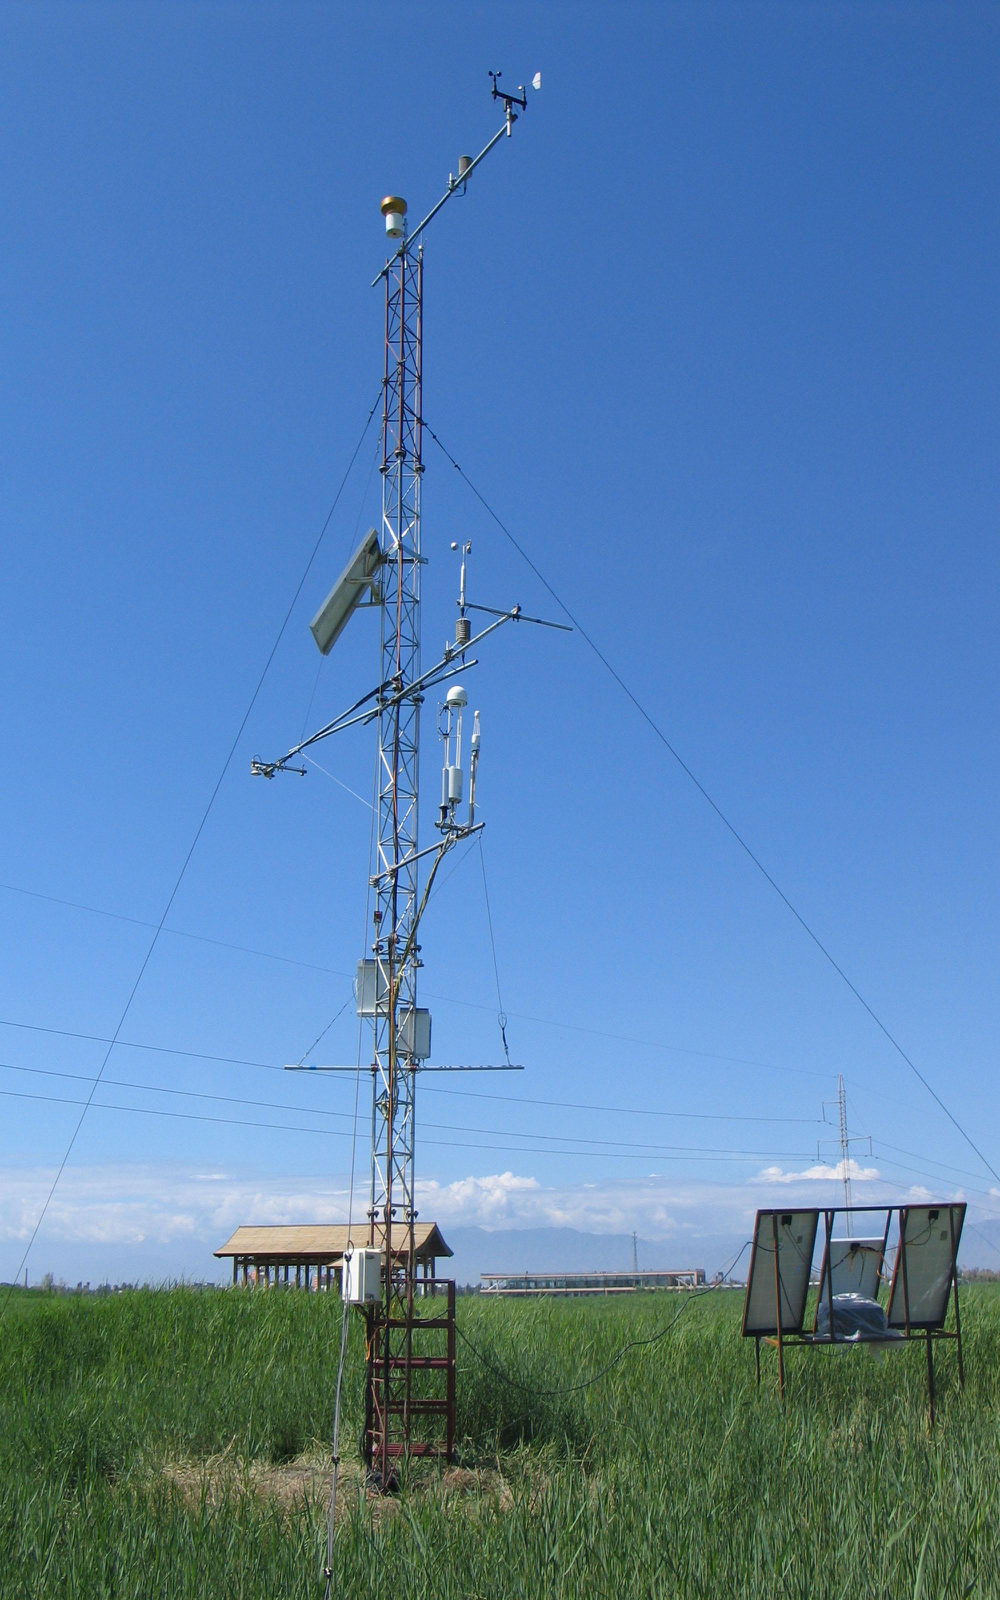 Qilian Mountains integrated observatory network: Dataset of Heihe integrated observatory network (automatic weather station of Zhangye wetland station, 2018)